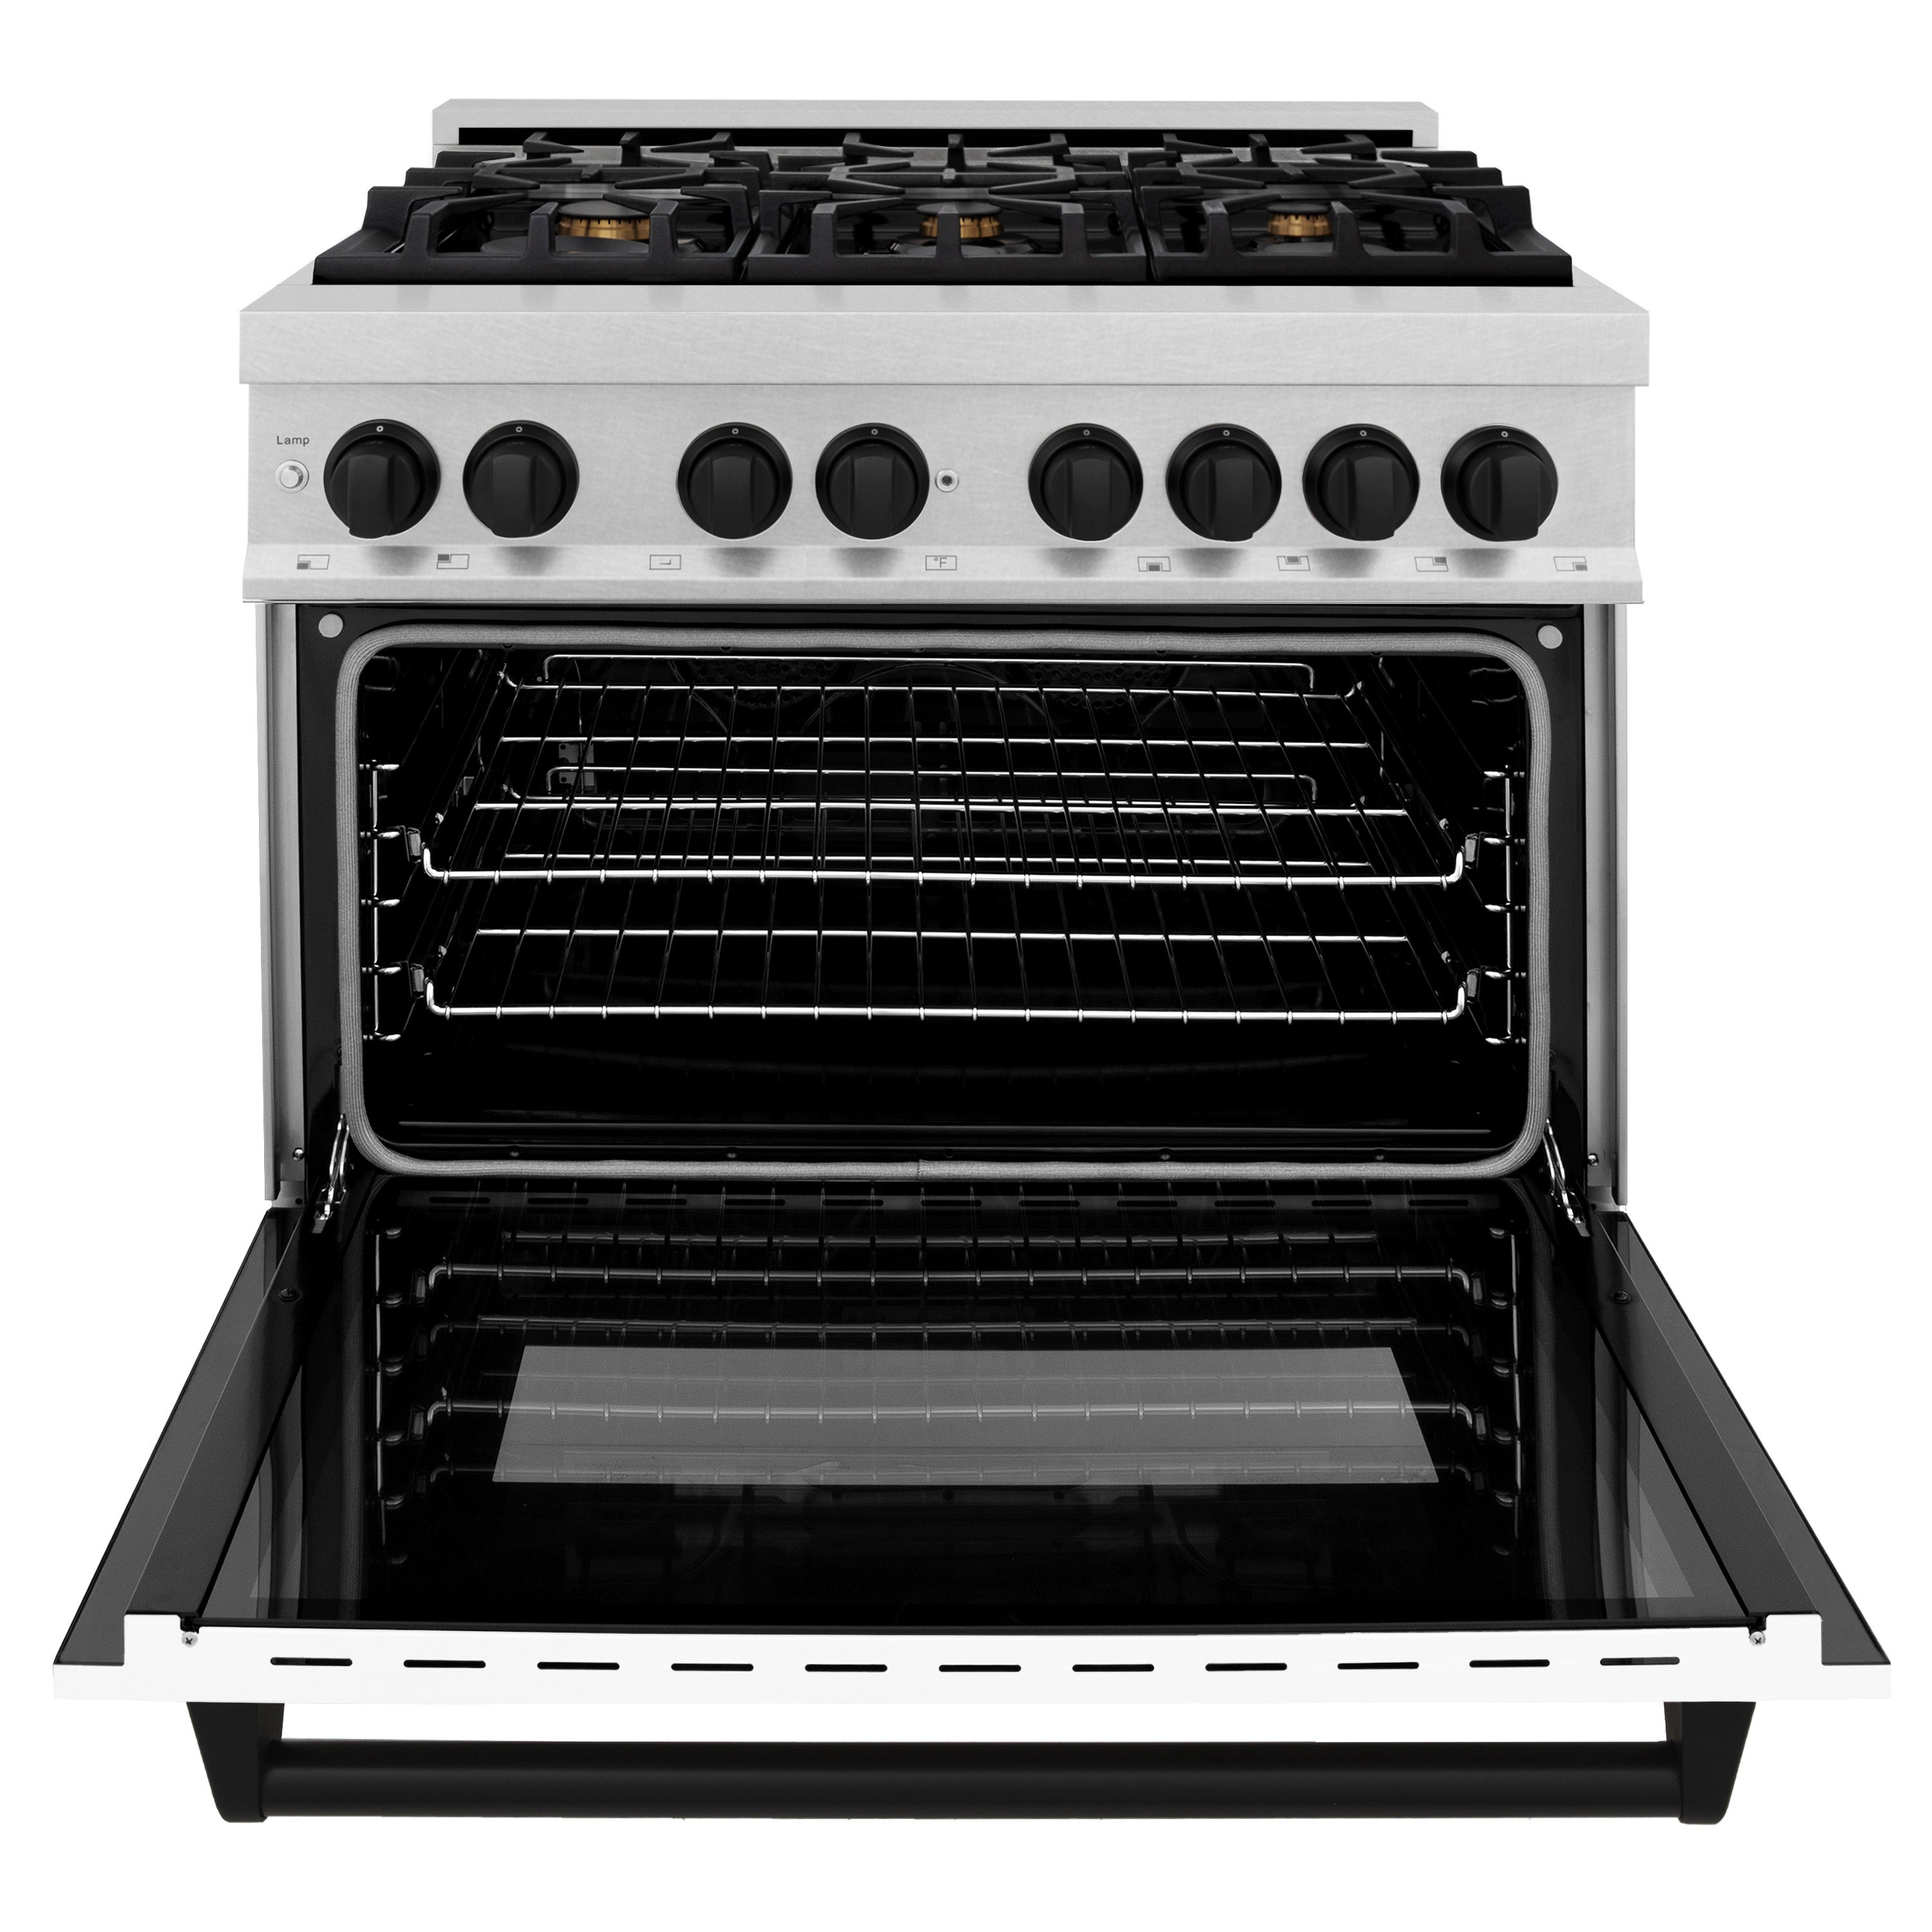 ZLINE Autograph Edition 36" 4.6 cu. ft. Dual Fuel Range with Gas Stove and Electric Oven in DuraSnowð Stainless Steel with White Matte Door and Matte Black Accents (RASZ-WM-36-MB)